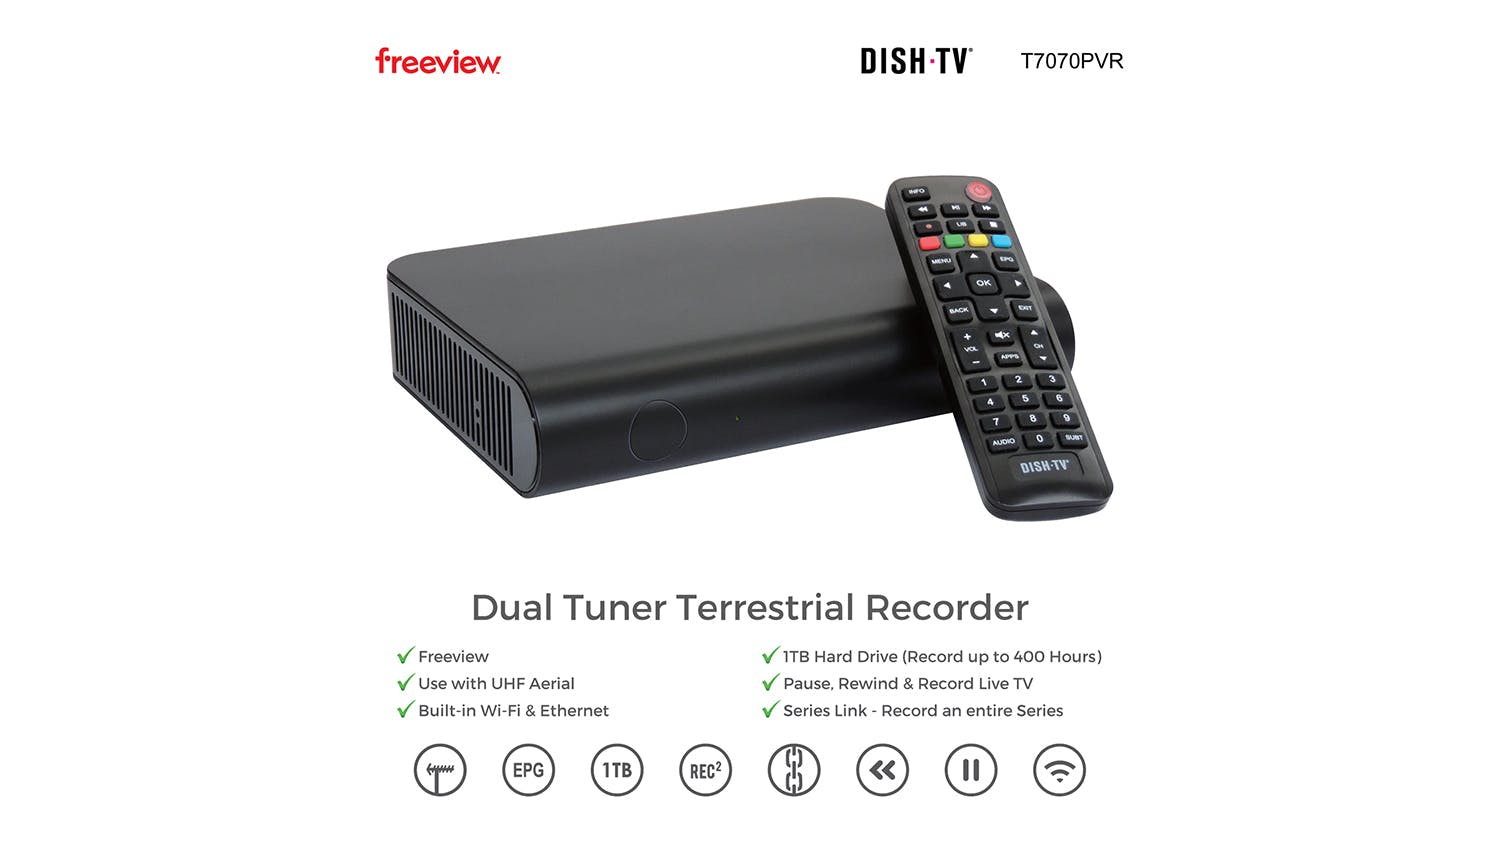 Dish TV T7070 Terrestrial Freeview Recorder with 1TB Hard Drive & Dual Tuner - Black